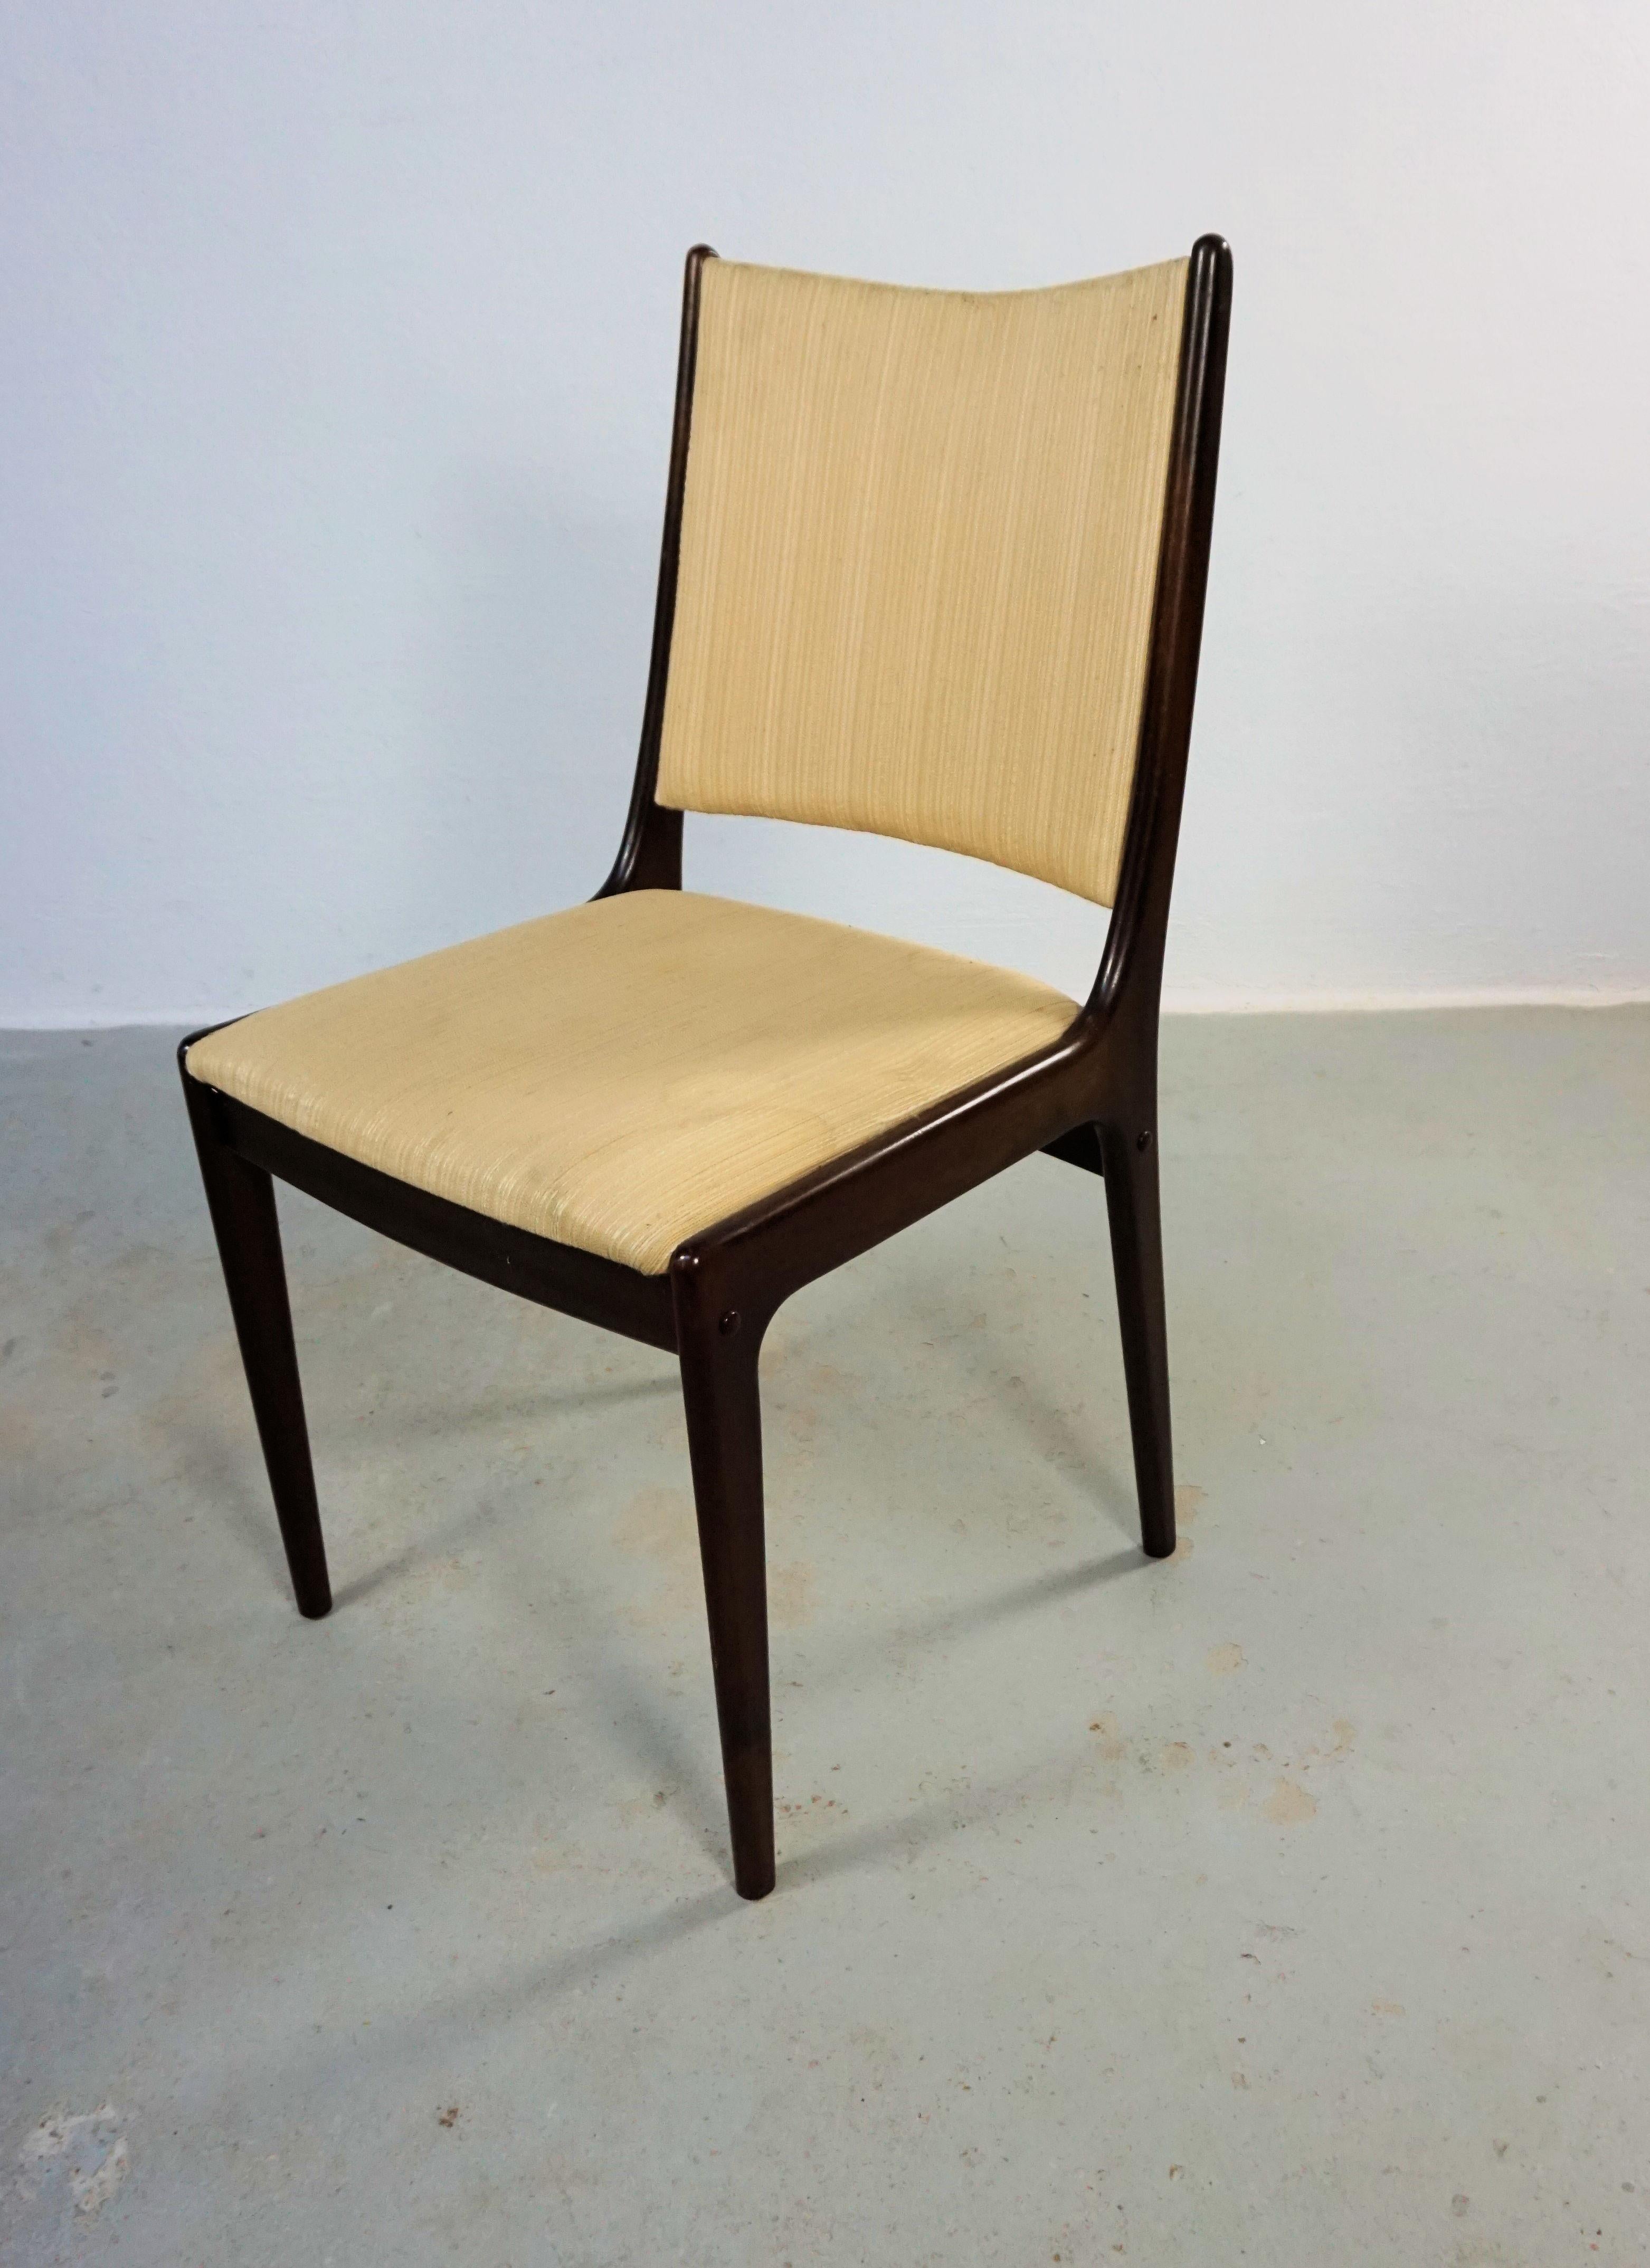 Six Restored Johannes Andersen Mahogany Dining Chairs Custom Upholstery Included In Good Condition For Sale In Knebel, DK